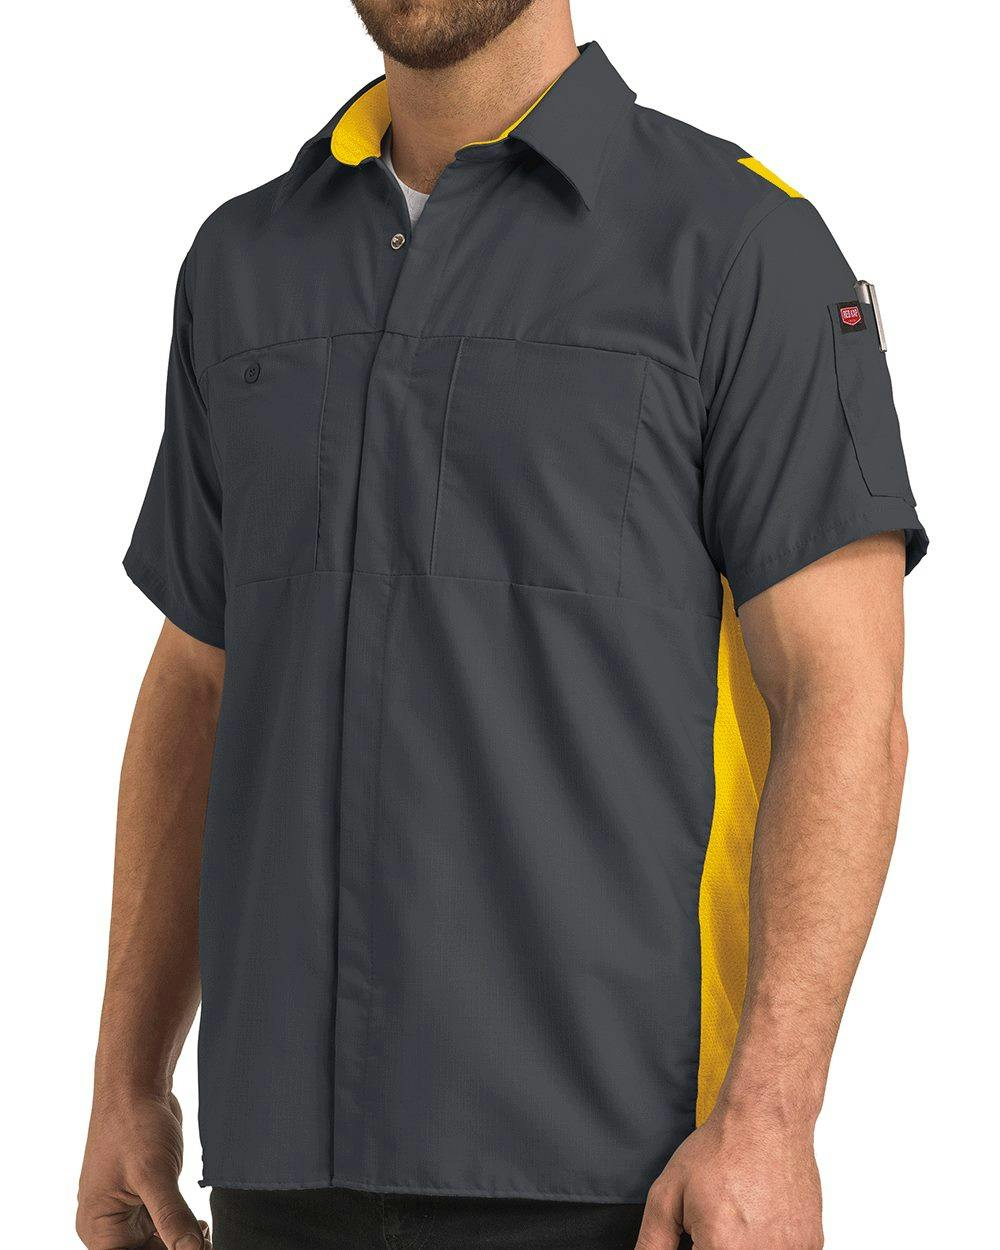 Image for Performance Plus Short Sleeve Shirt with Oilblok Technology - Tall Sizes - SY42T